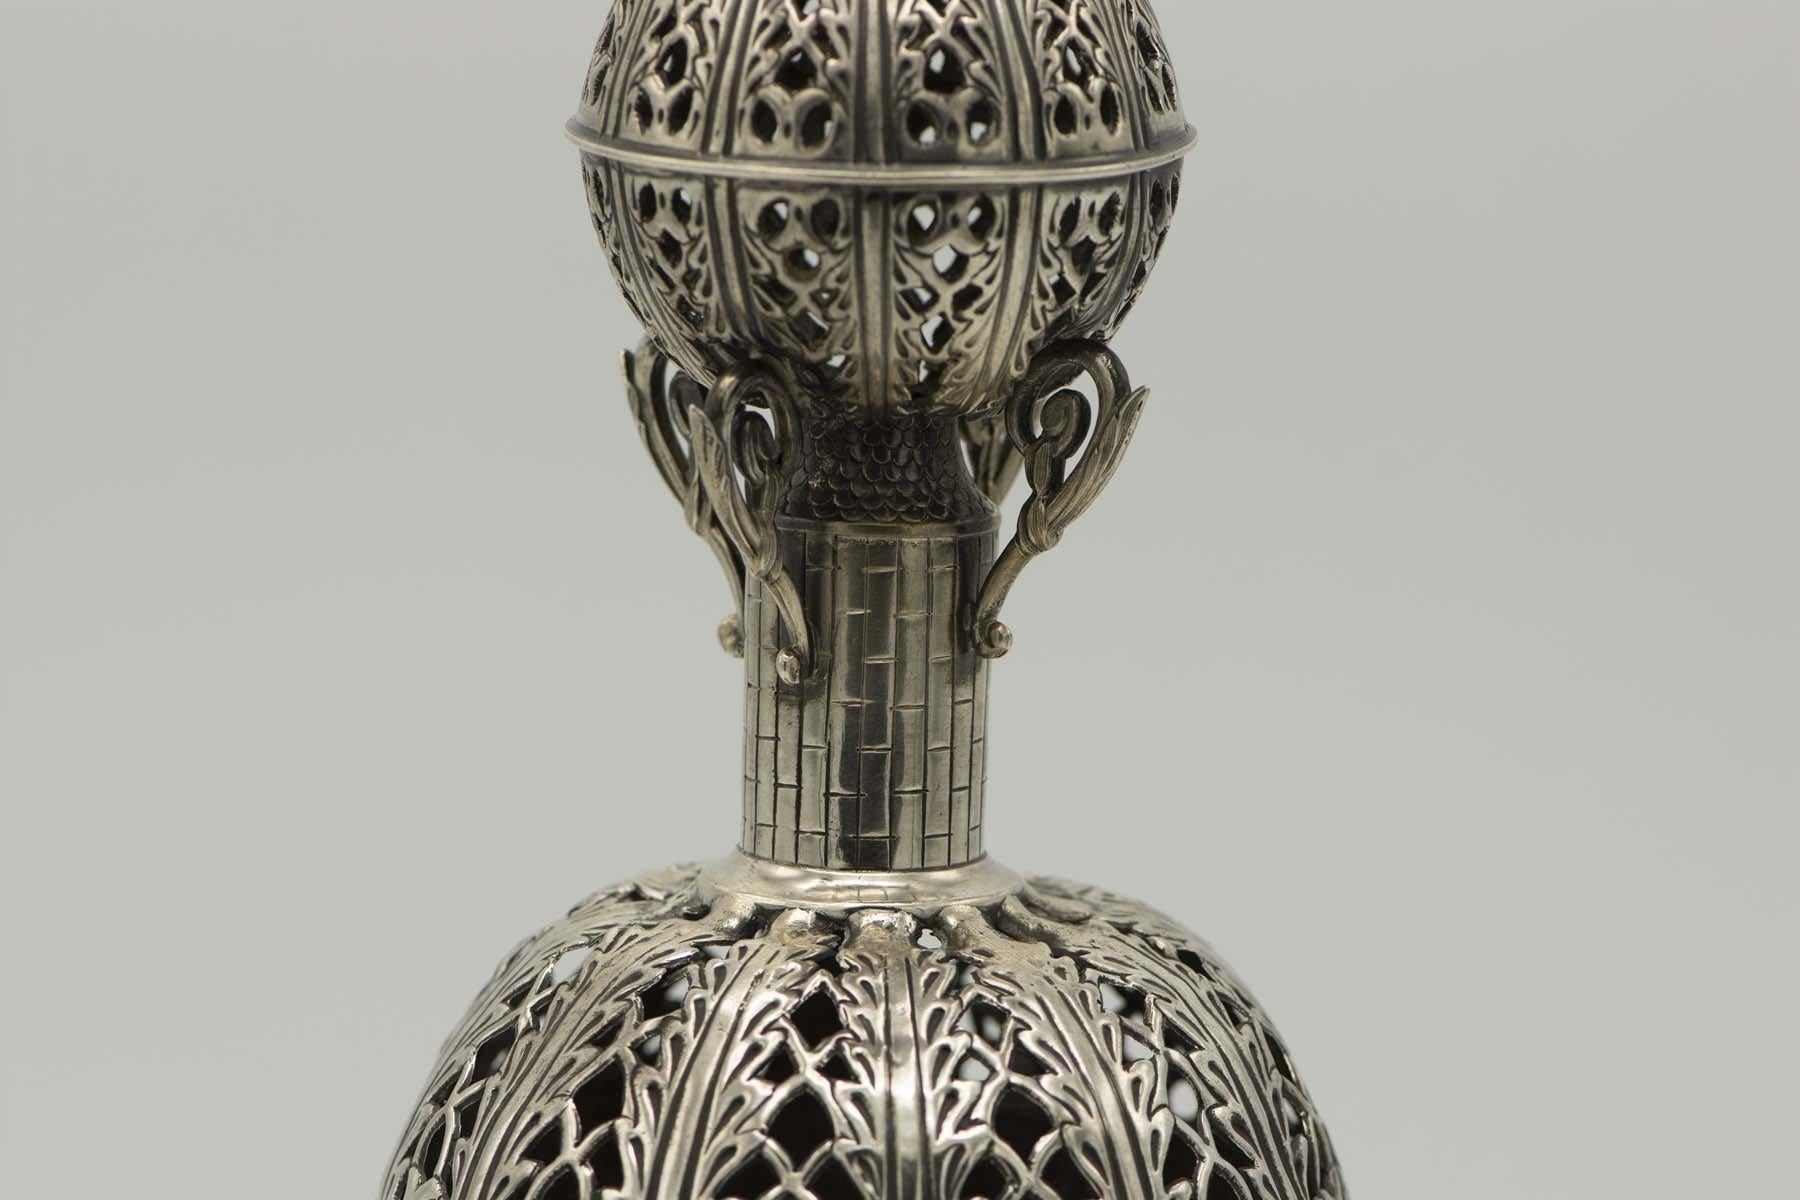 Handmade silver Torah finials, chased, pierced, engraved, and cast, France, circa 1860.
The finials are constructed with large open-work decorated ball in the middle, above it a pole with engraving of bricks and roof tiles, leaf-decorated